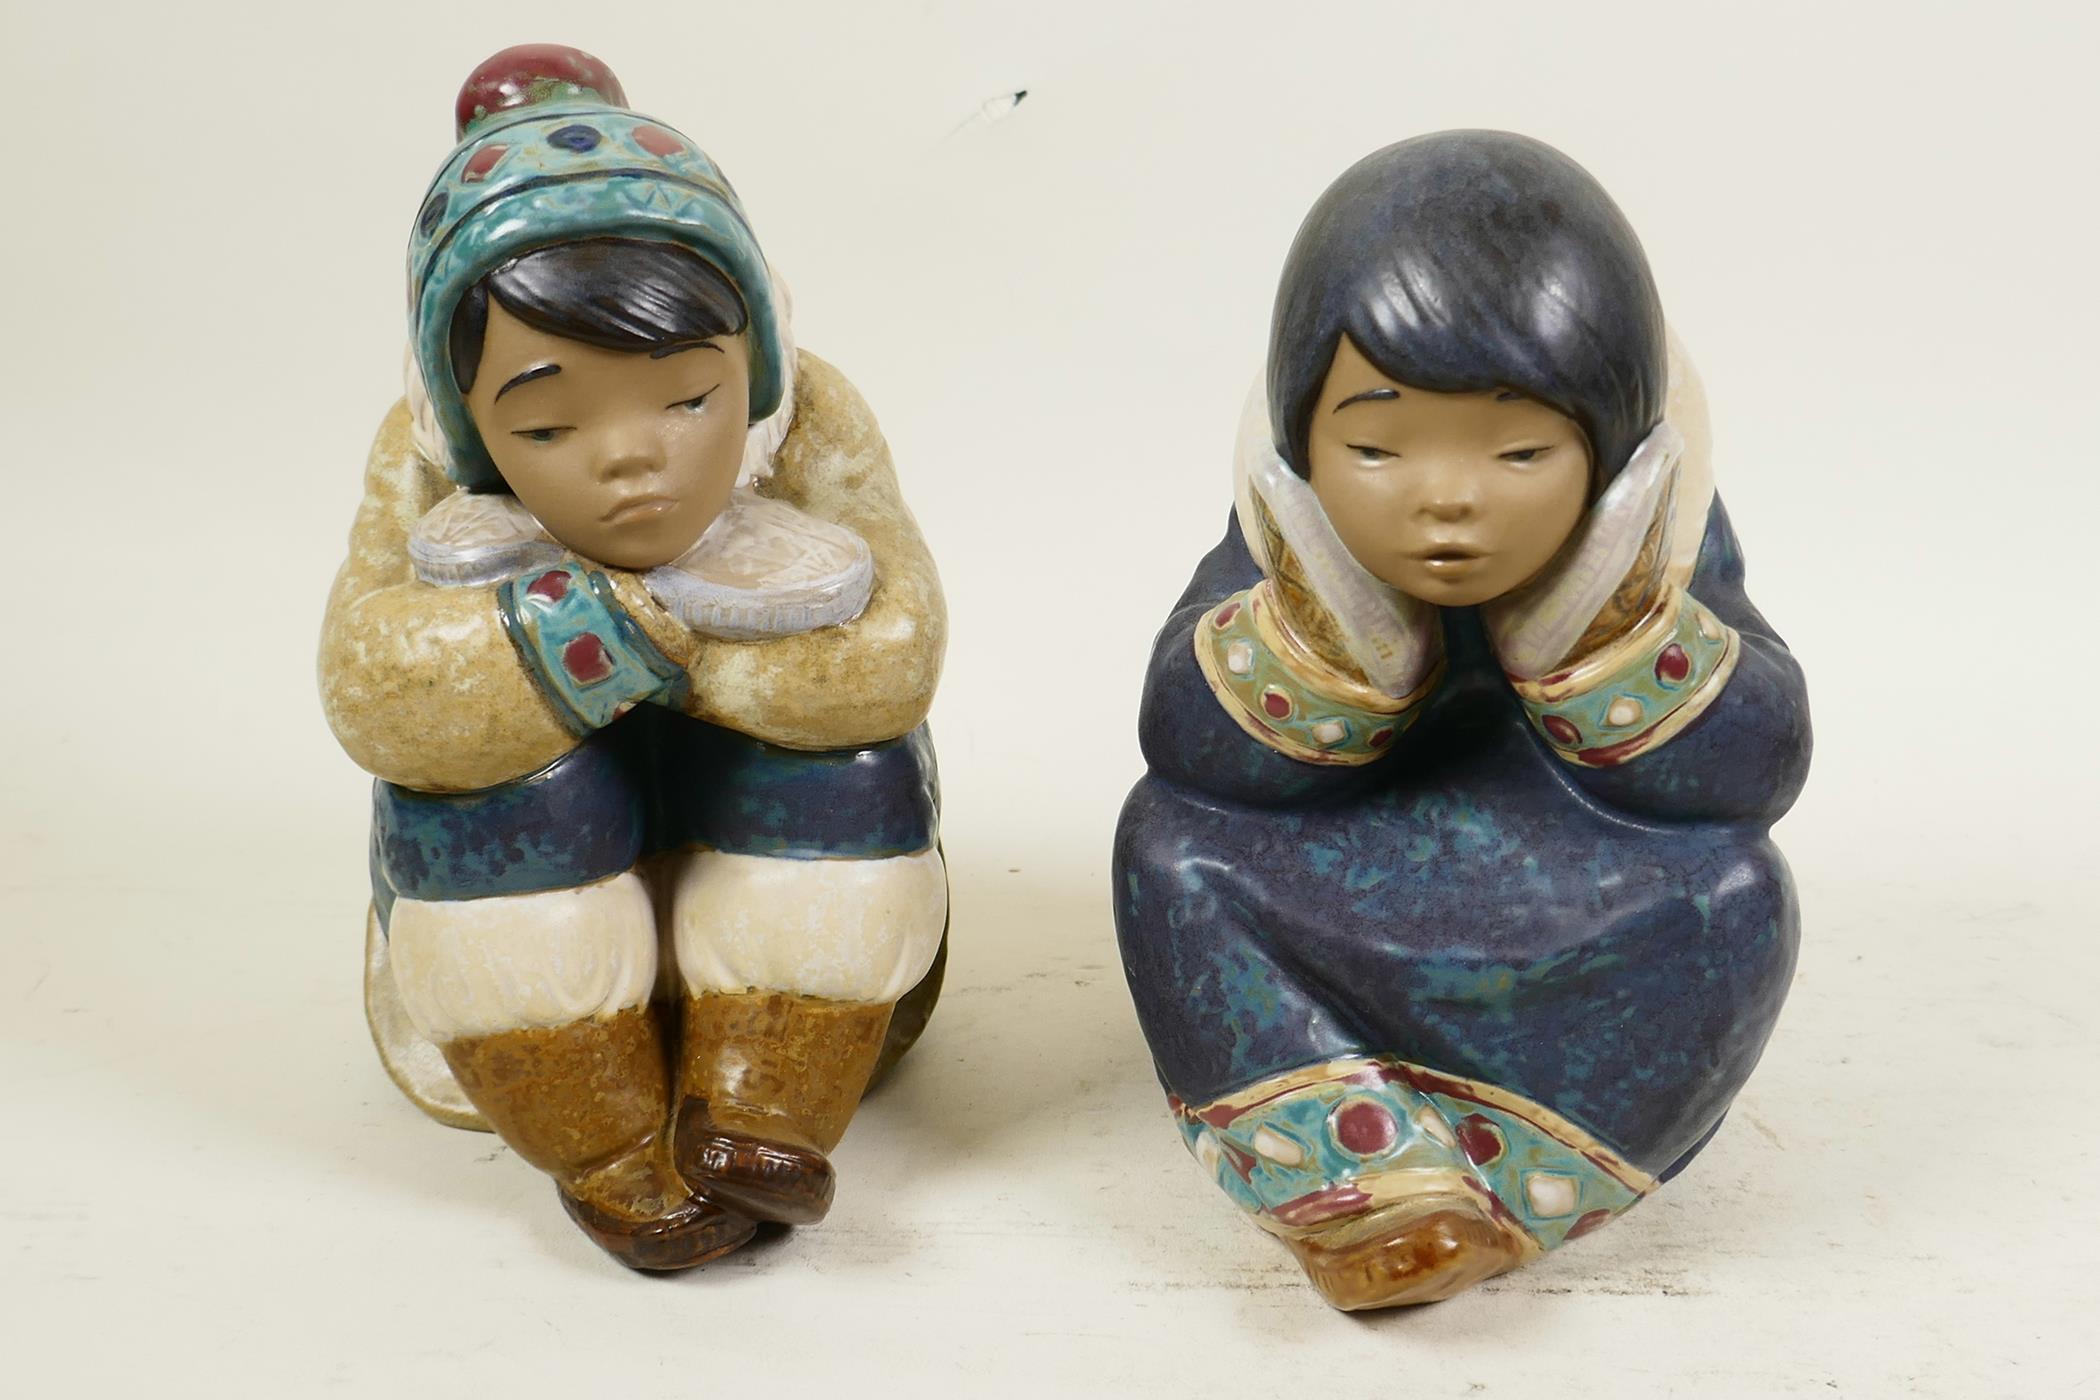 Two boxed Lladro figures of Eskimo children, 12158 and 12159